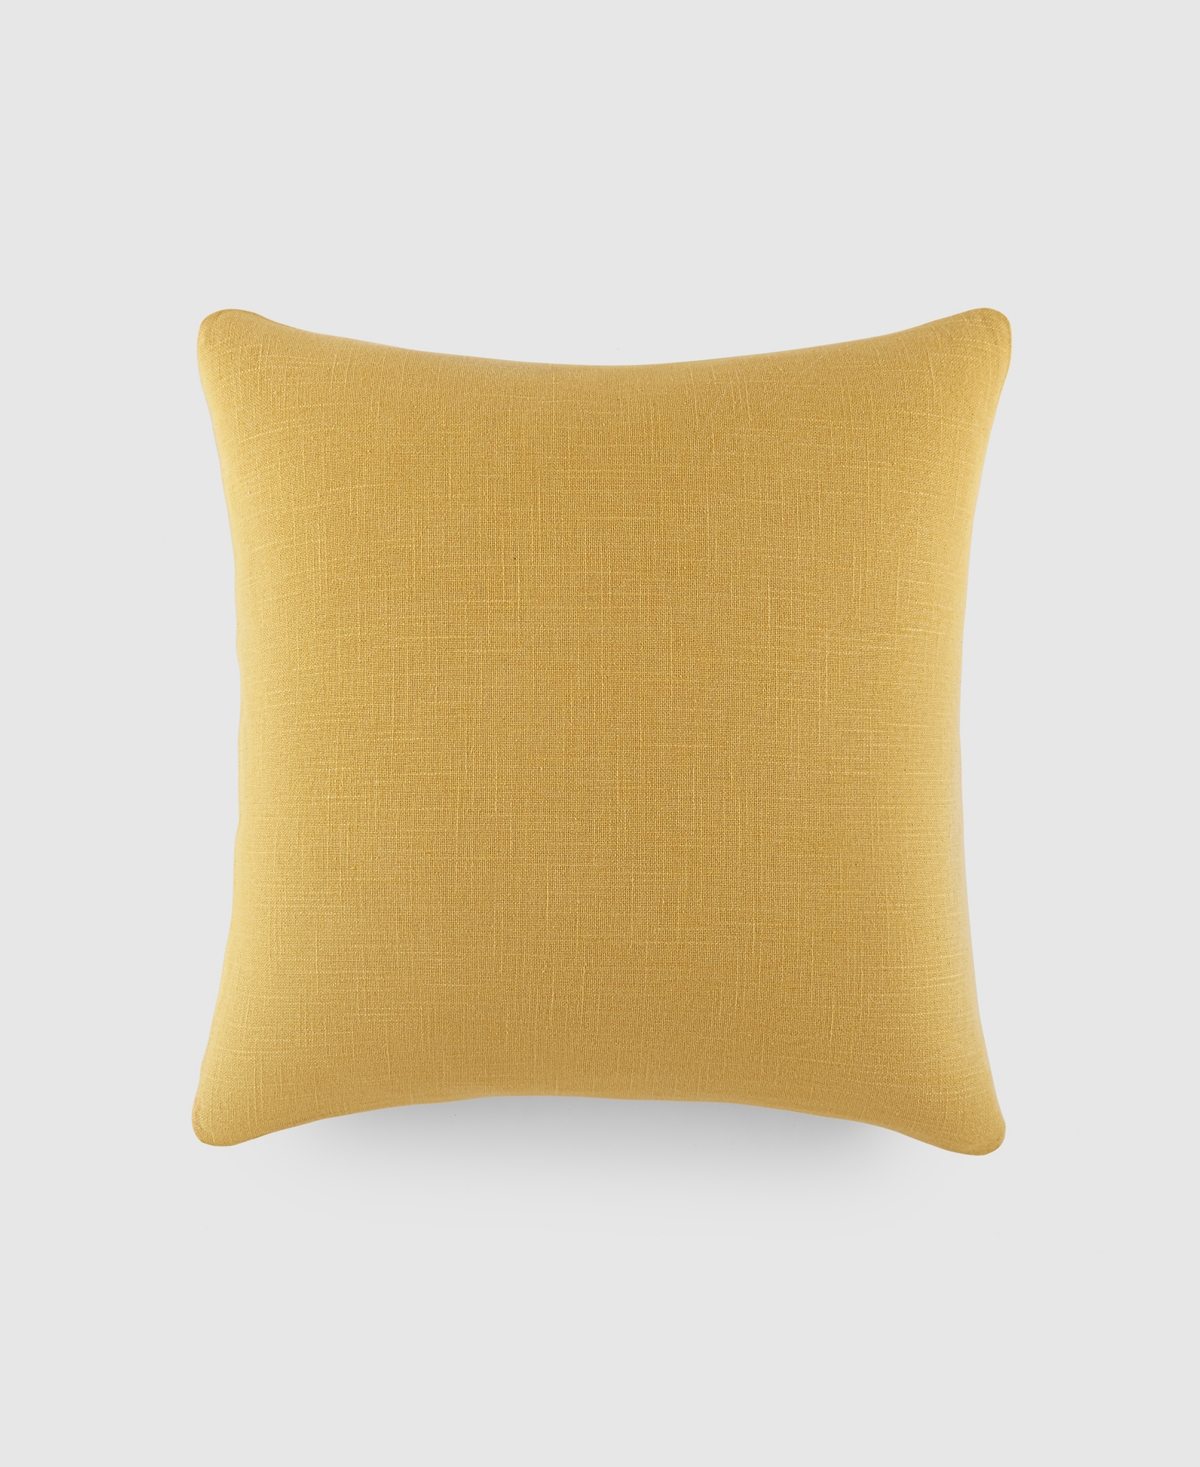 Ienjoy Home Washed And Distressed Decorative Pillow, 20" X 20" In Mustard